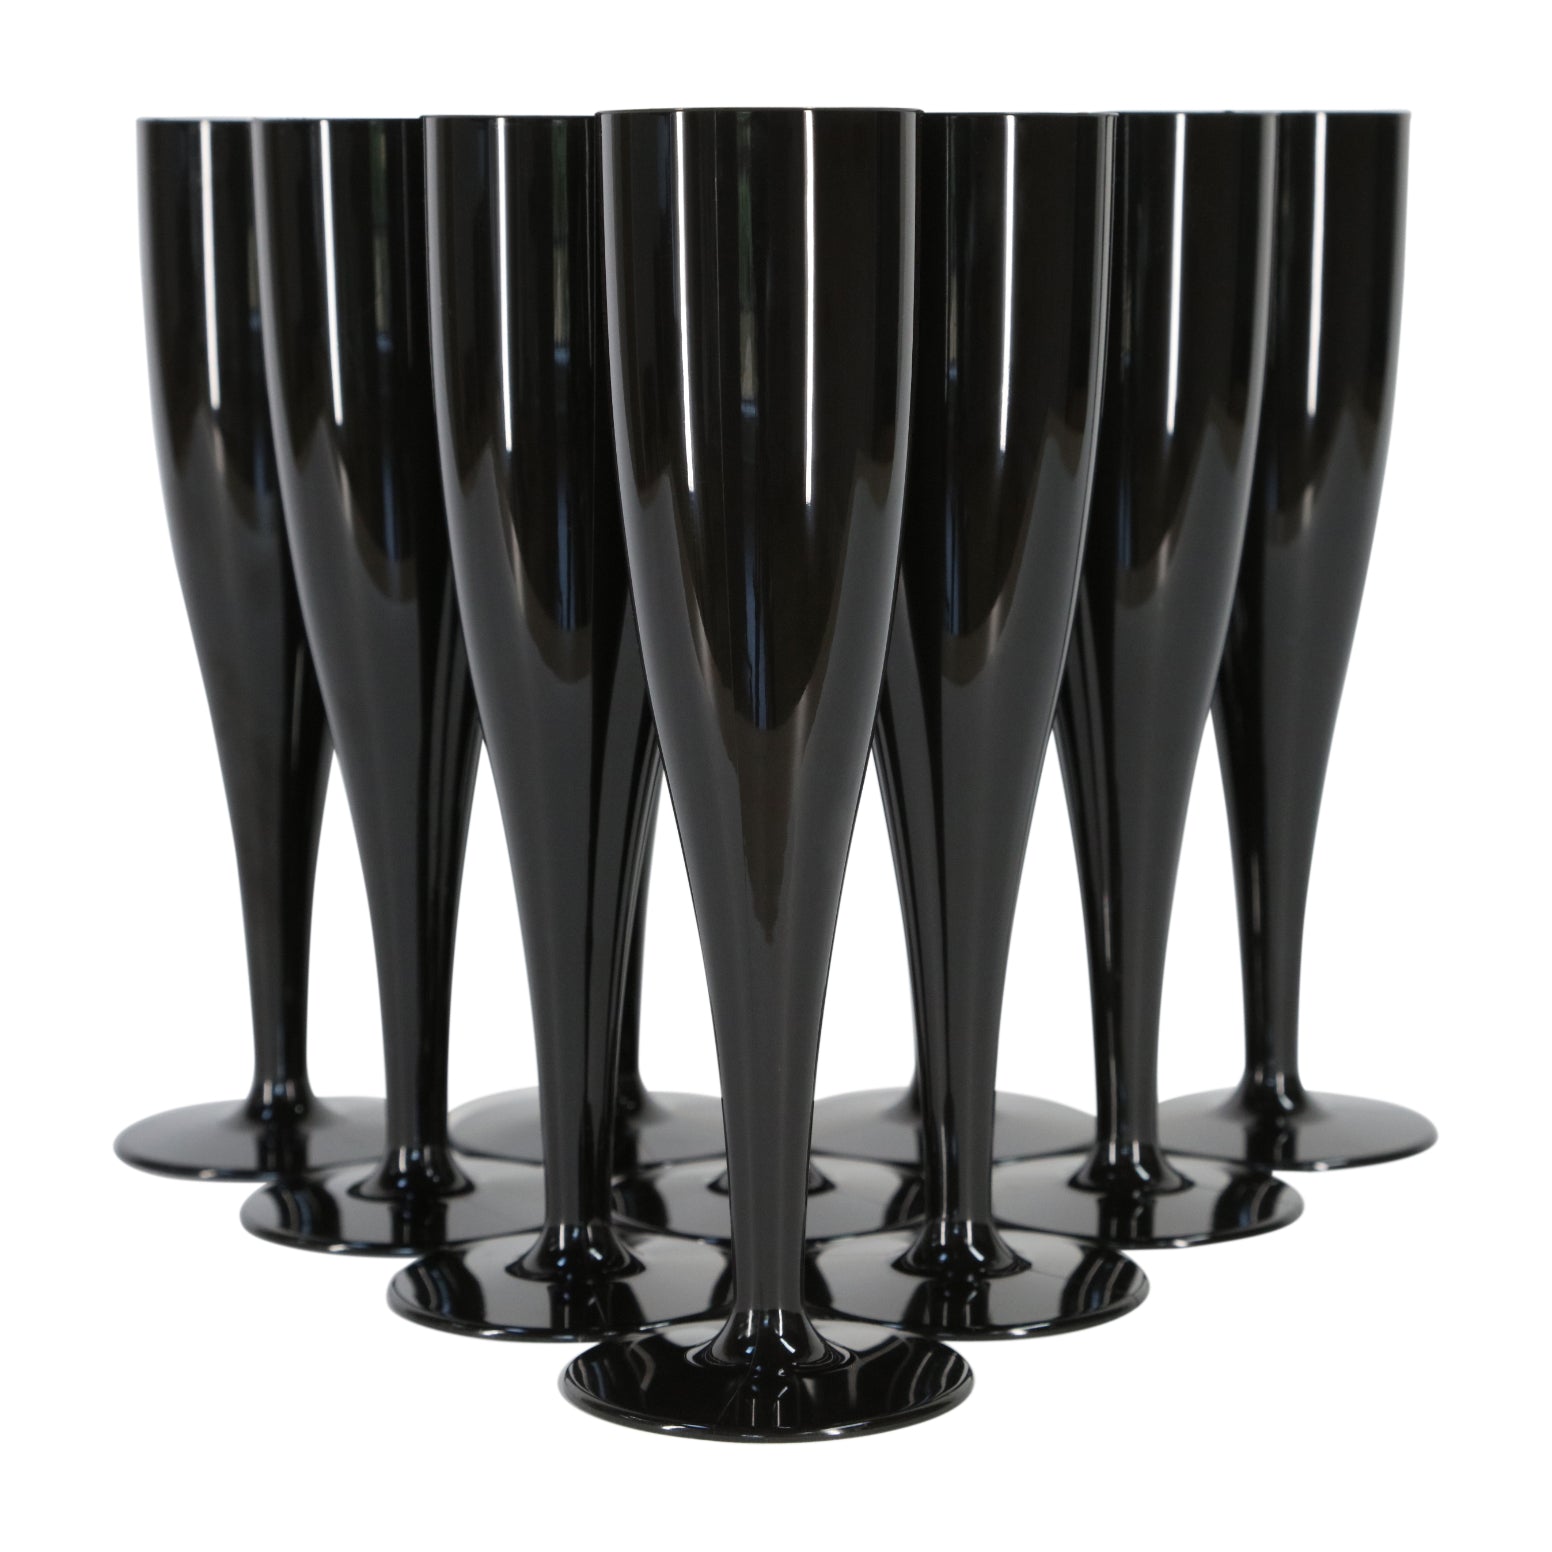 100 x Black Prosecco Flutes – Made from Biodegradable Material in glossy Bold Black Colour 1-Piece Champagne Glass (Pack of 100 Glasses) for use Indoors and Outdoors, Halloween, Parties, BBQ, Hen Do-5056020186793-EY-PP-118-Product Pro-Black Flutes, Champagne Flute, Champagne Glasses, Flutes, Prosecco Flute, Prosecco Glasses